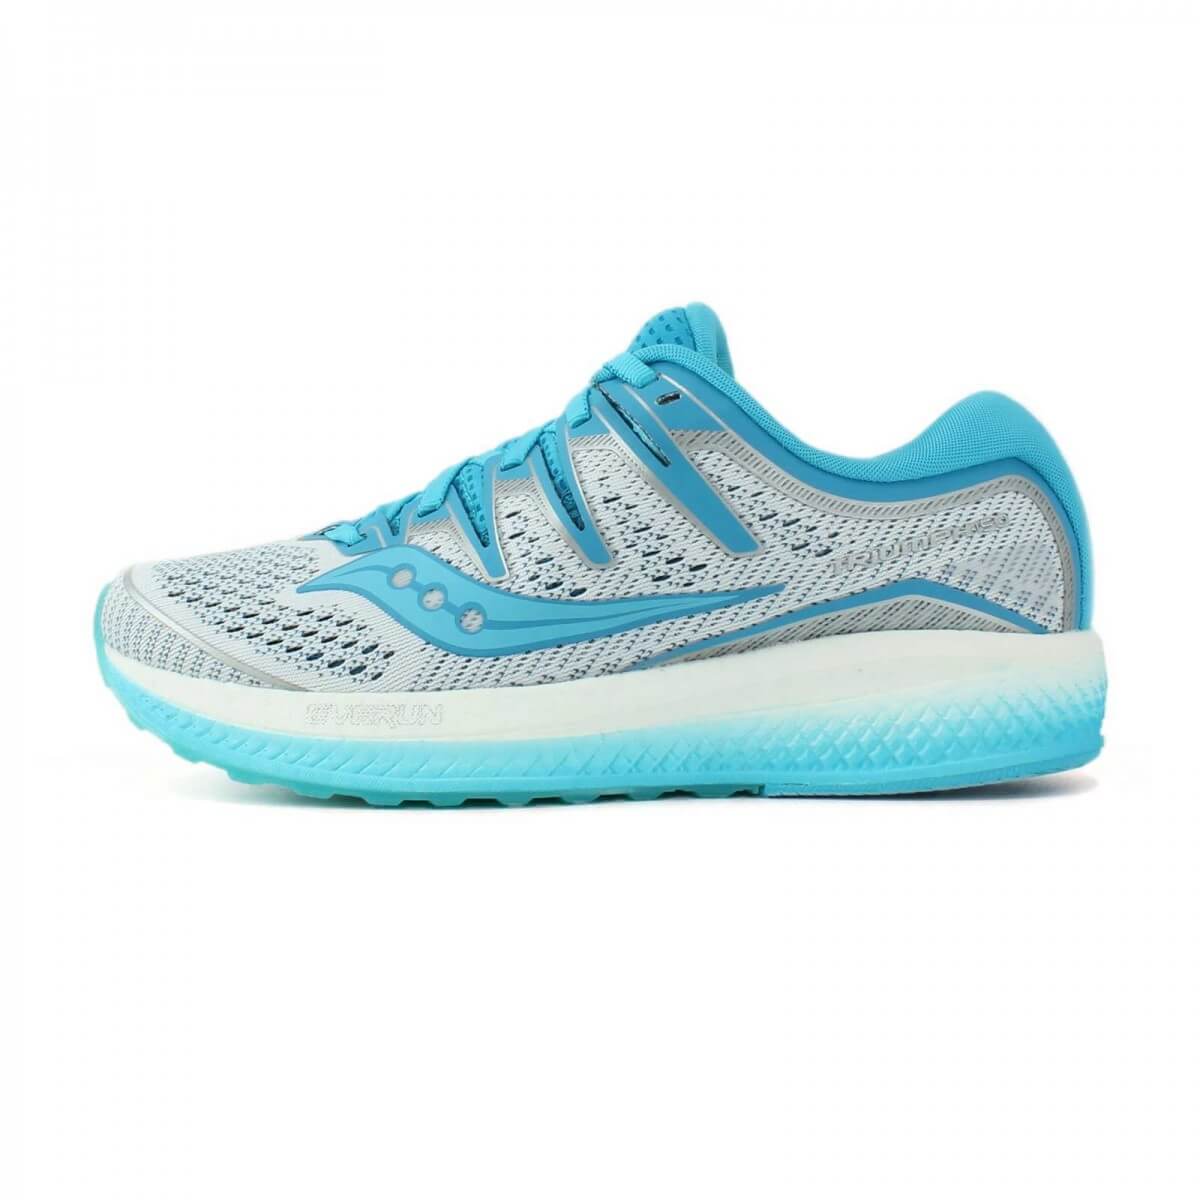 saucony guide 6 mujer 2015